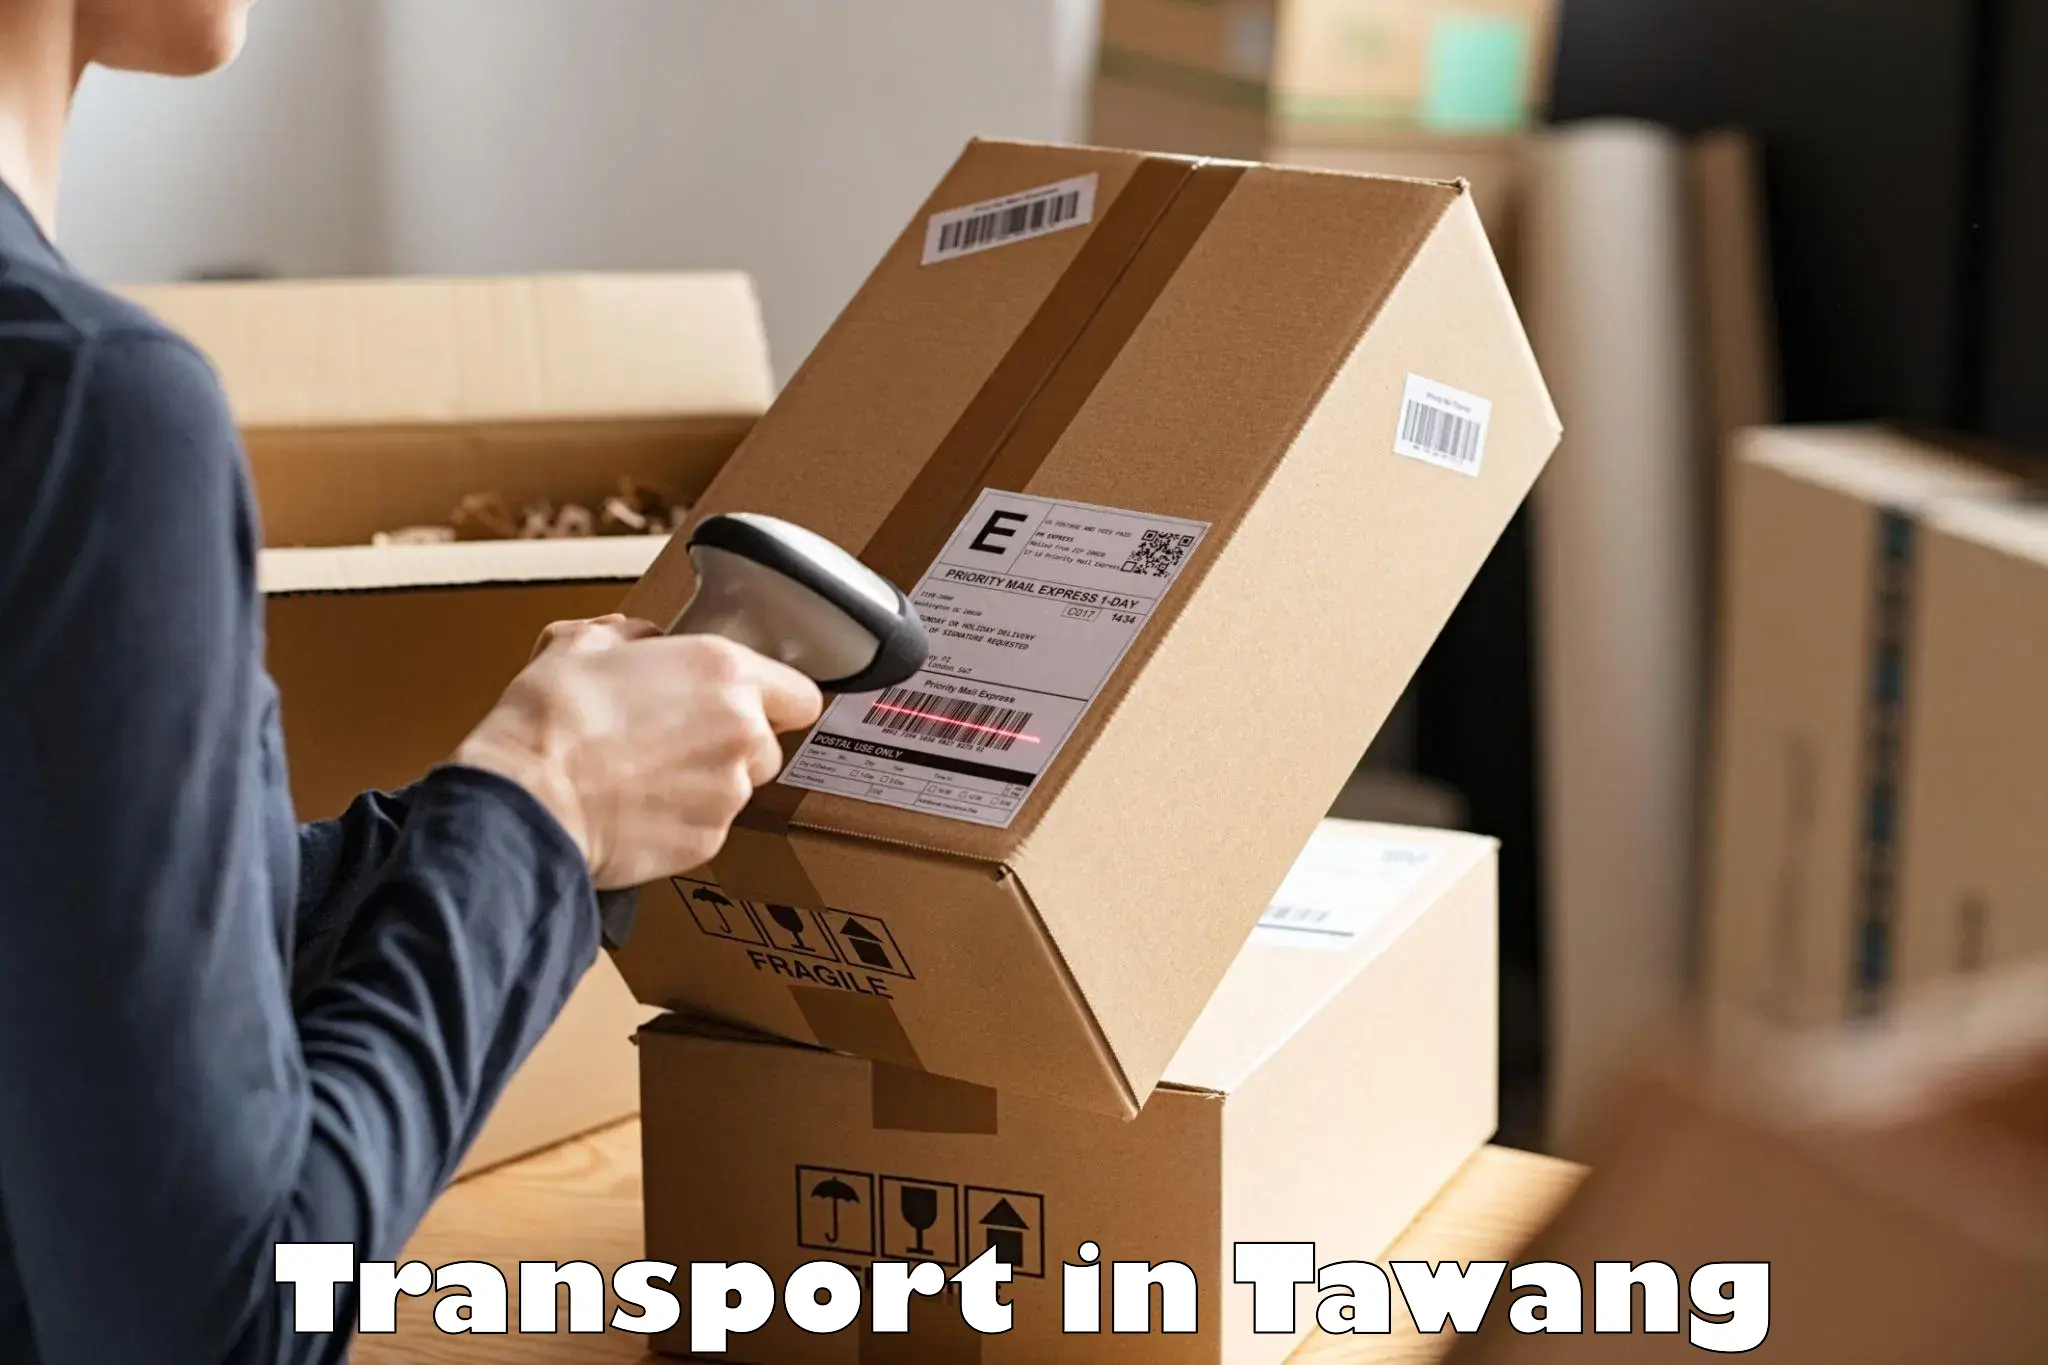 Interstate transport services in Tawang